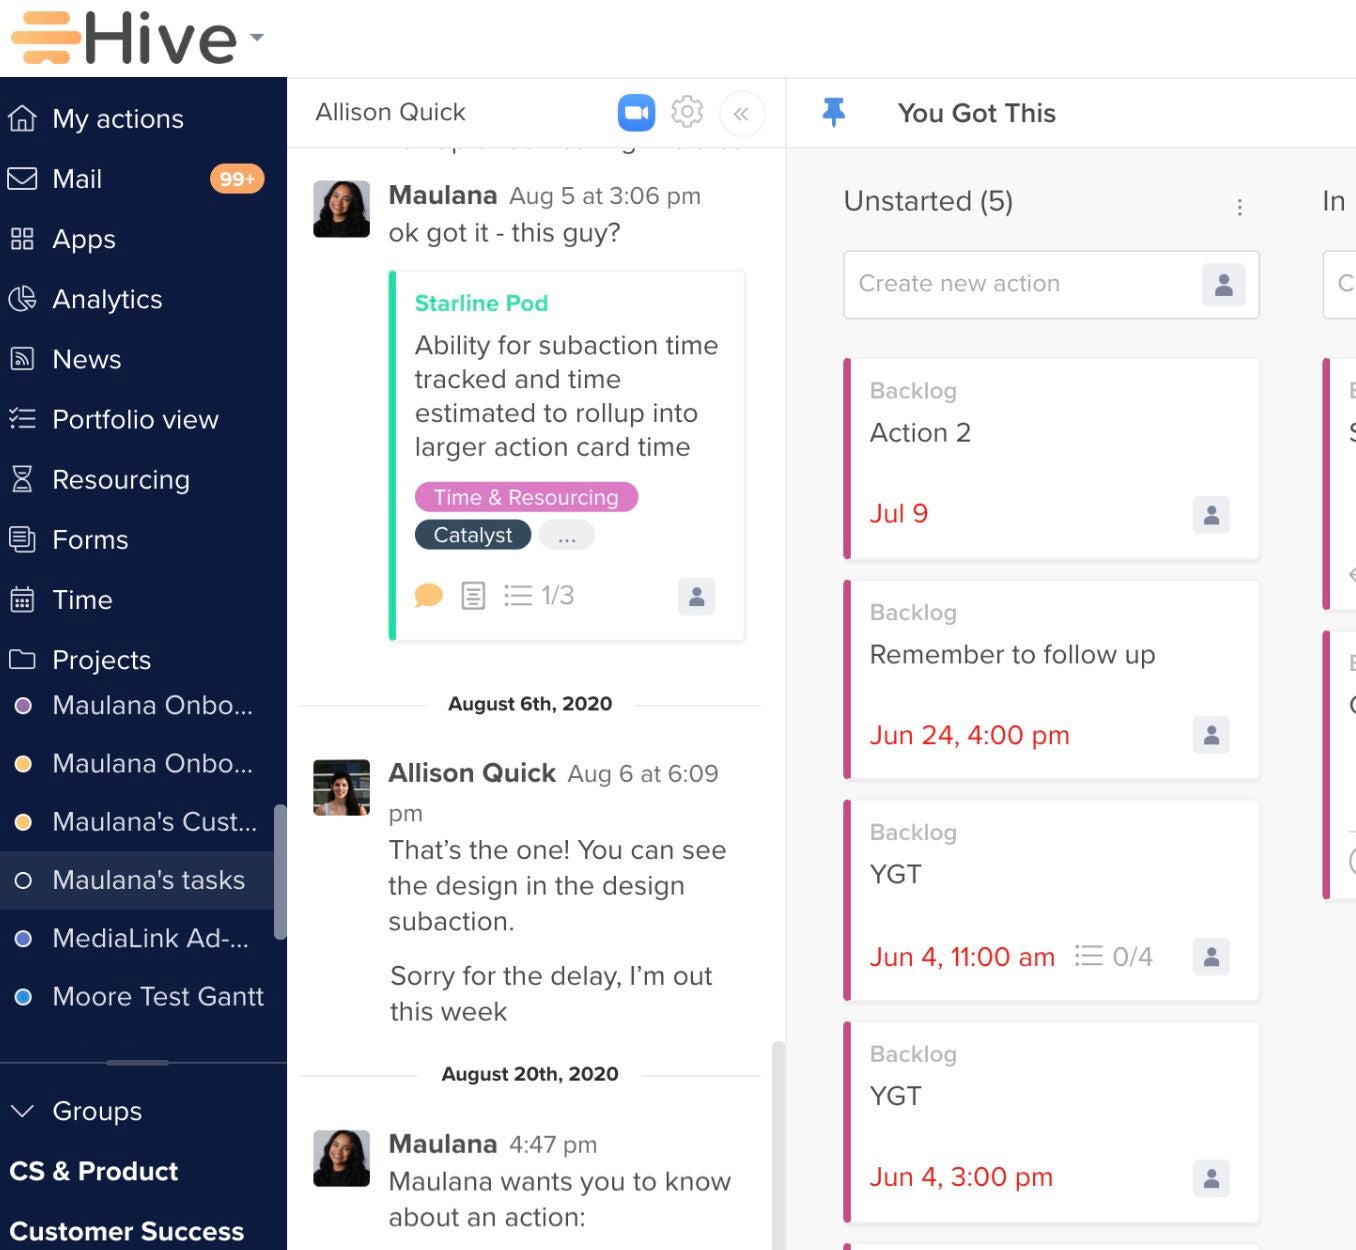 Hive’s chat messaging appears in a panel on the left-hand side of the screen